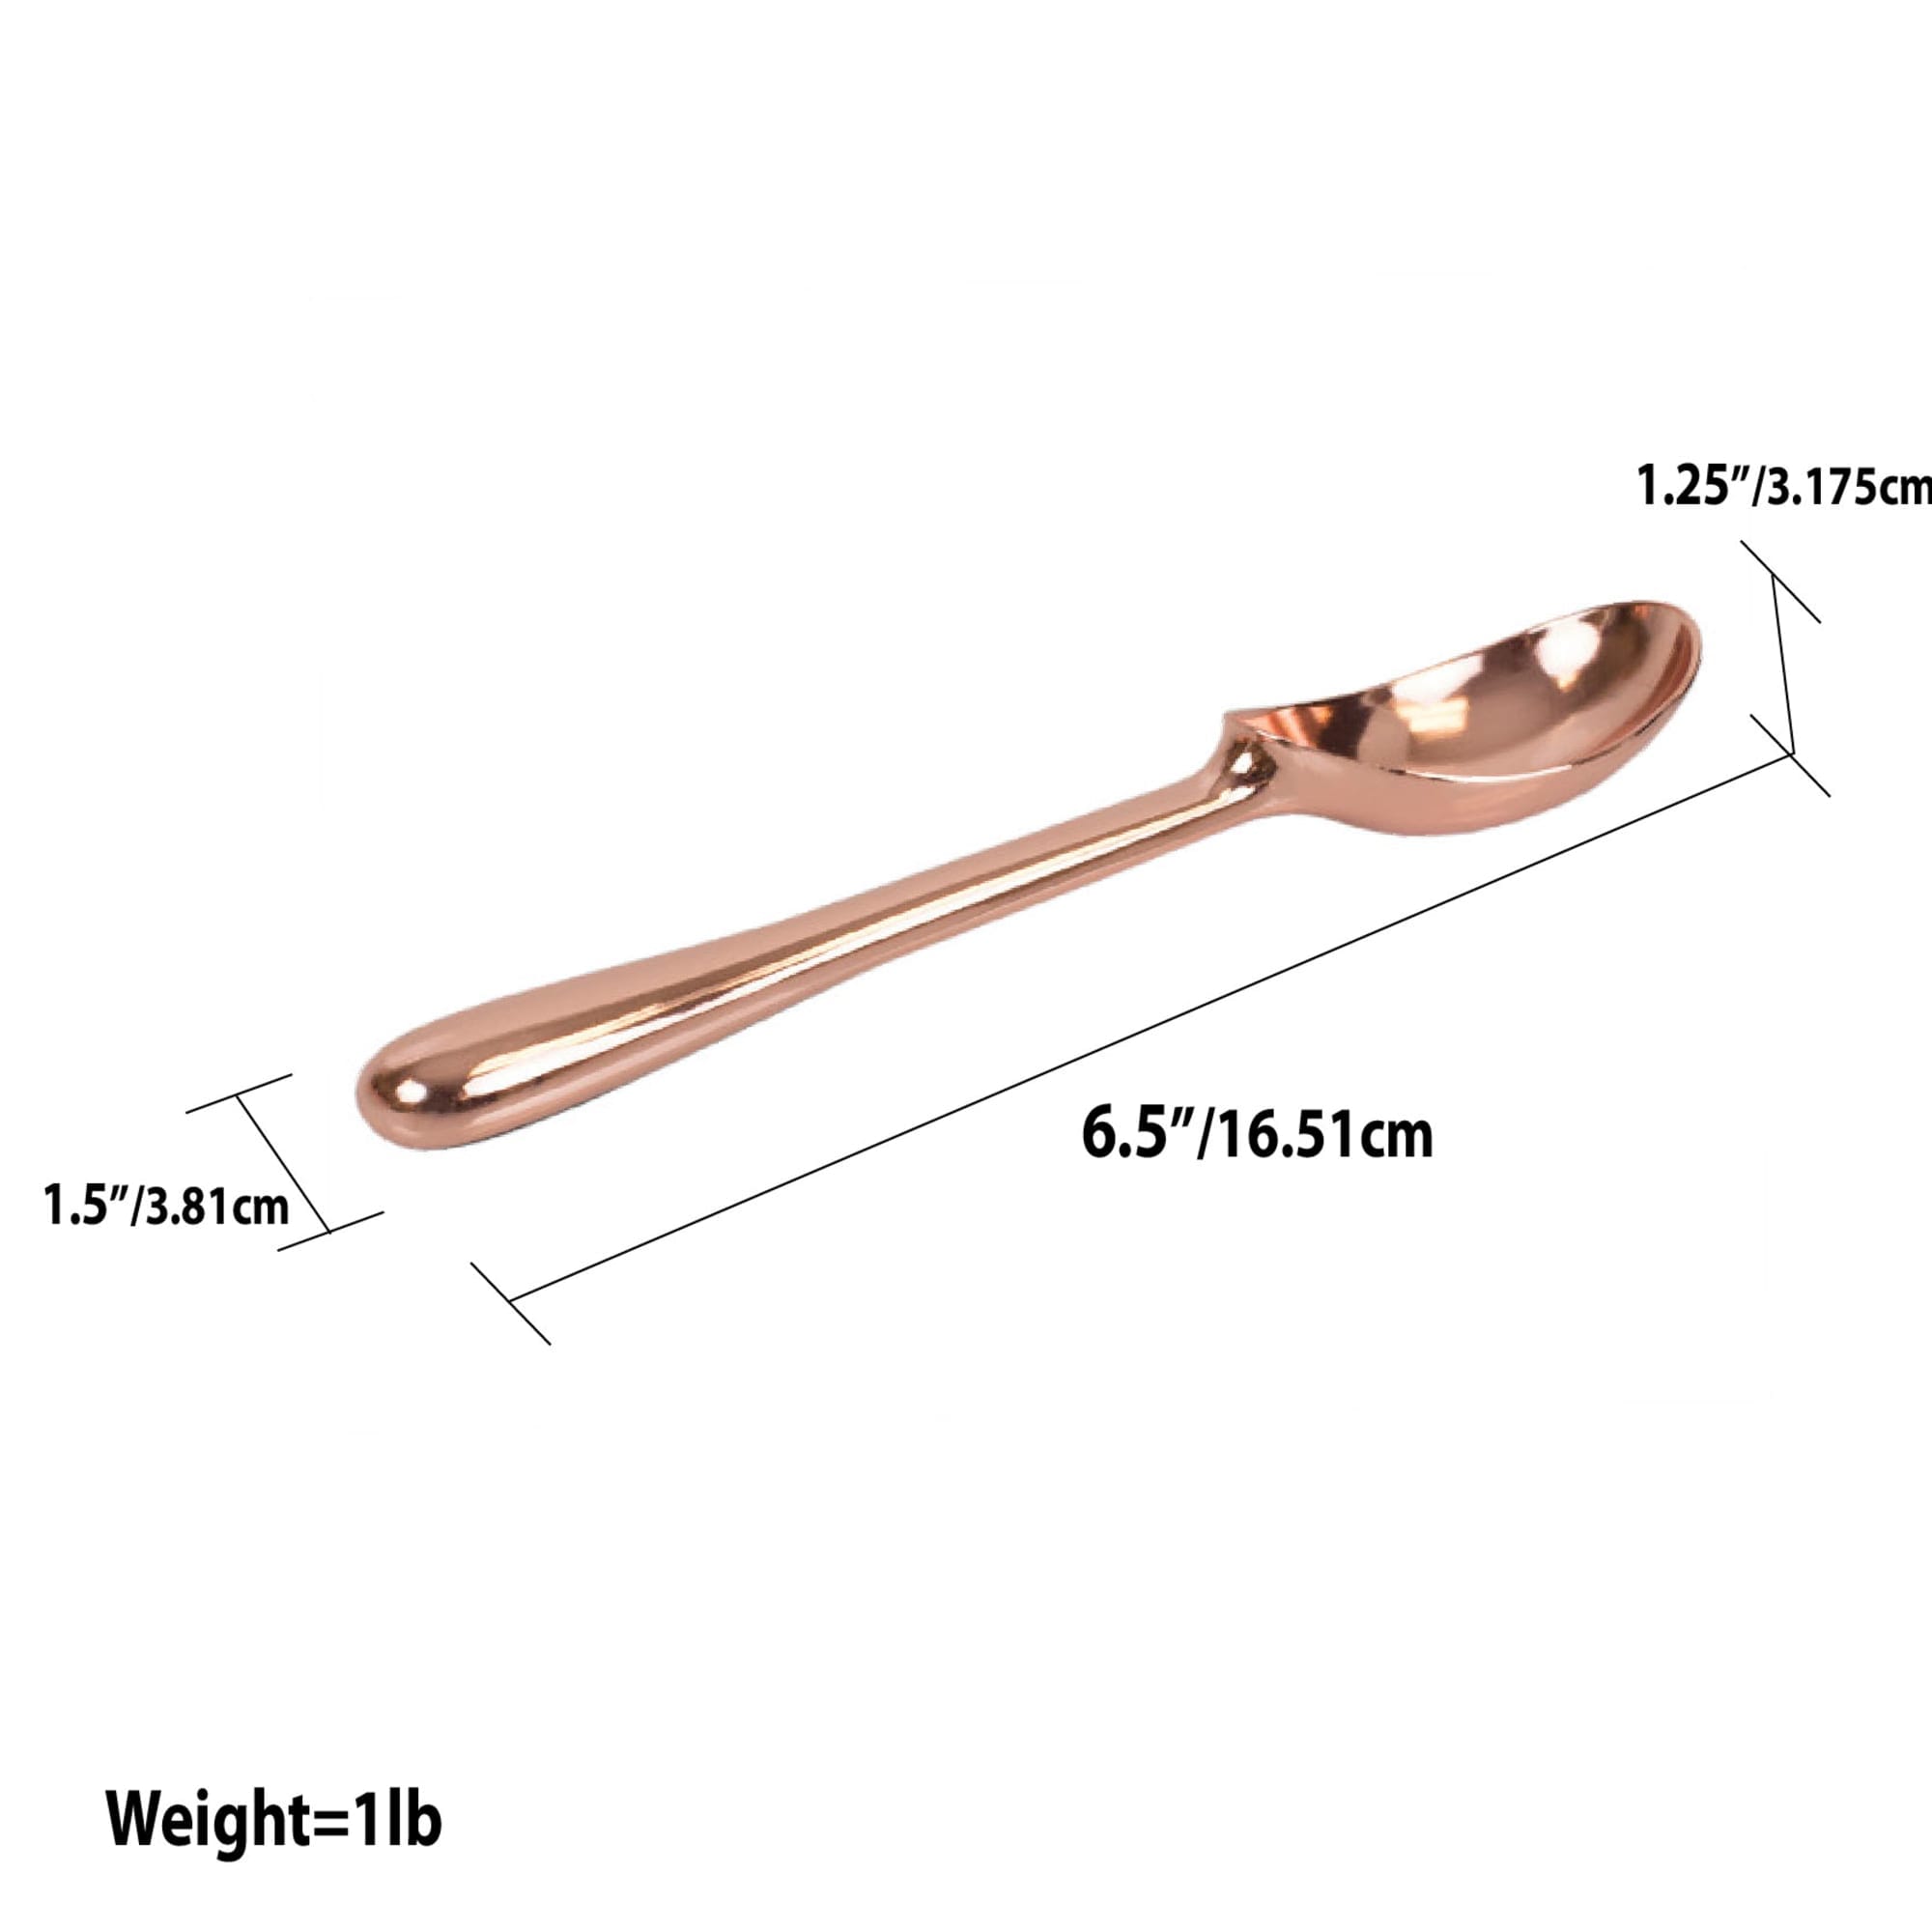 Home Basics Nova Collection Zinc Ice Cream Scoop, Rose Gold $4.00 EACH, CASE PACK OF 24